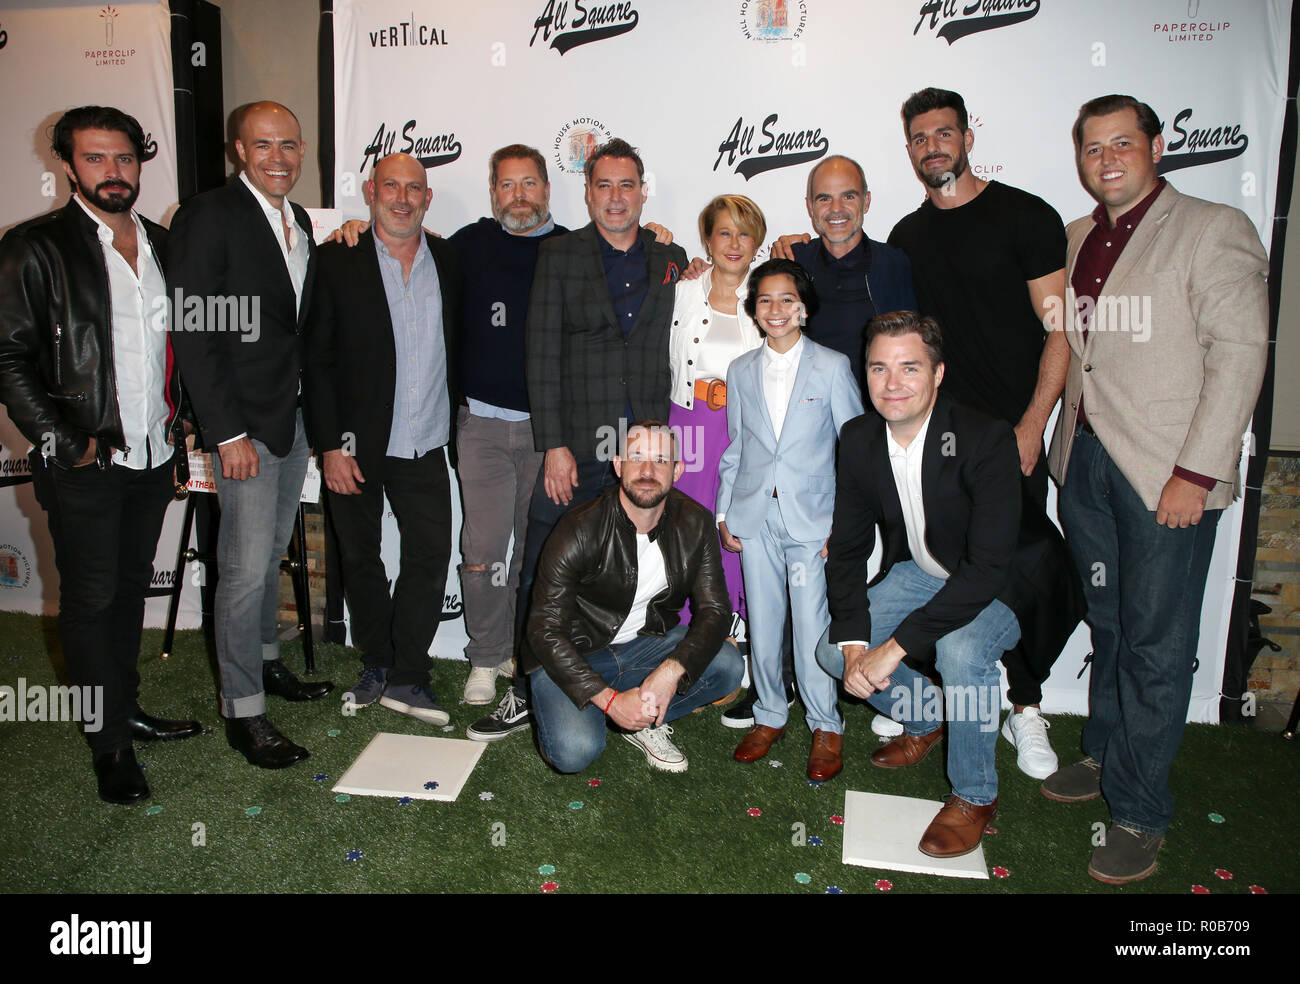 LA PREMIERE PLACE POUR TOUS Avec : Jonathan Rosenthal, Ben Cornwell, Johm Hyams, Andrew Sikking, Yeardley Smith, Jesse Ray Sheps, Michael Kelly, Brett Davis, Nick Smith Où : Westwood, California, United States Quand : 02 Oct 2018 Credit : FayesVision/WENN.com Banque D'Images